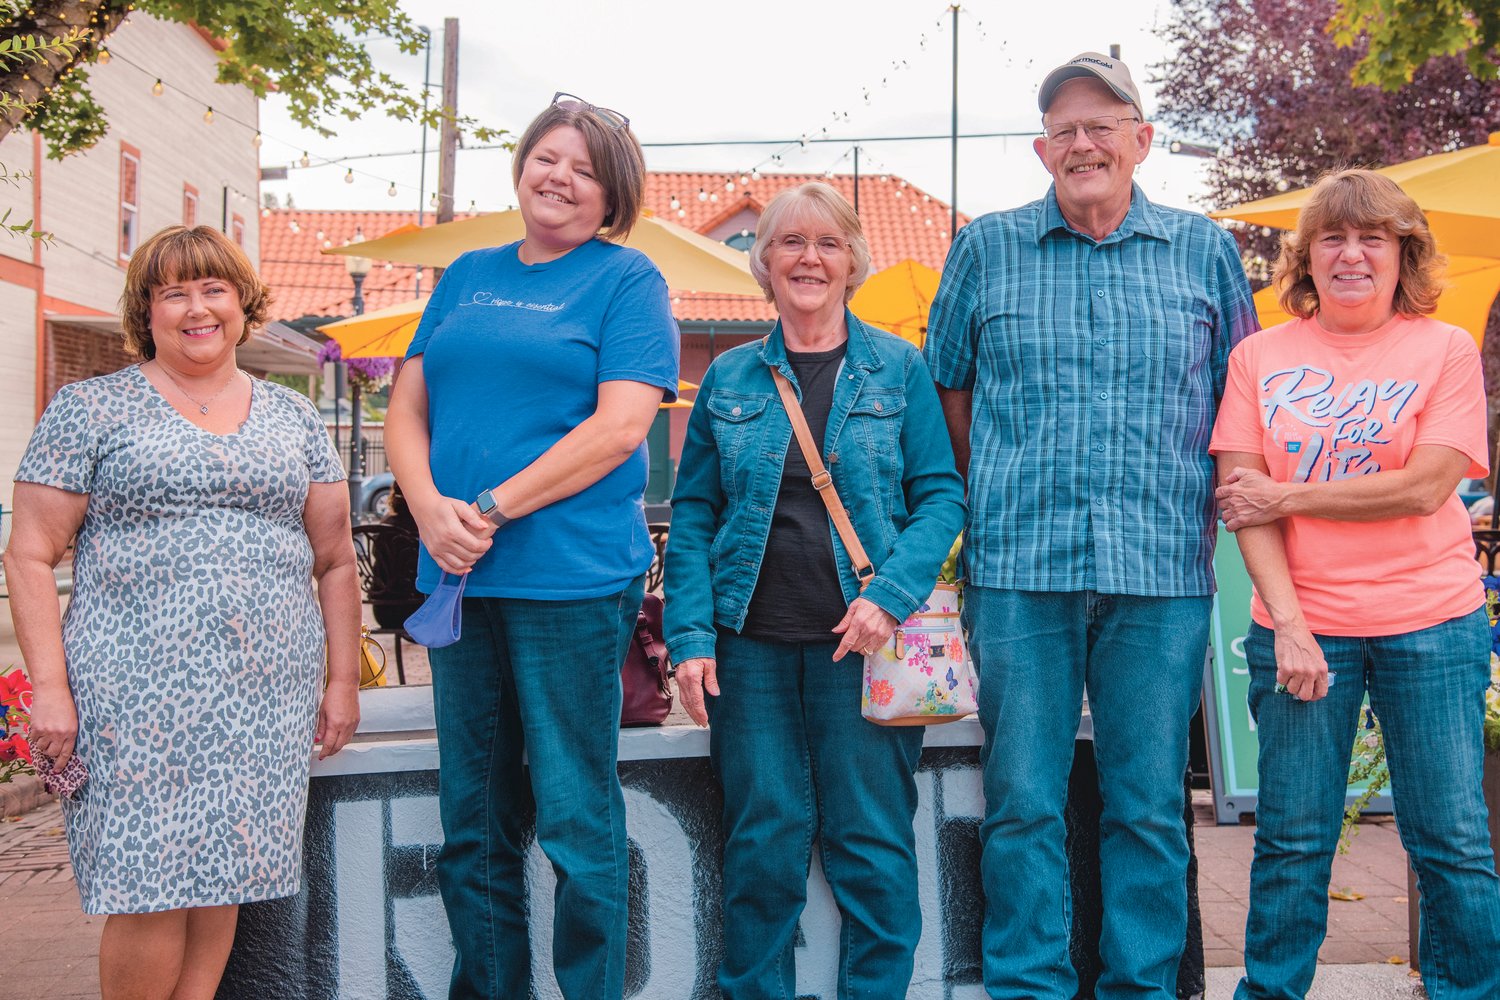 From left, cancer survivors Patty Powell, Jeannine Kelley and Katie Foss along with her husband John Foss and Patty Allee, Relay for Life co-lead organizer, smile and pose for a photo in Centralia on Thursday.